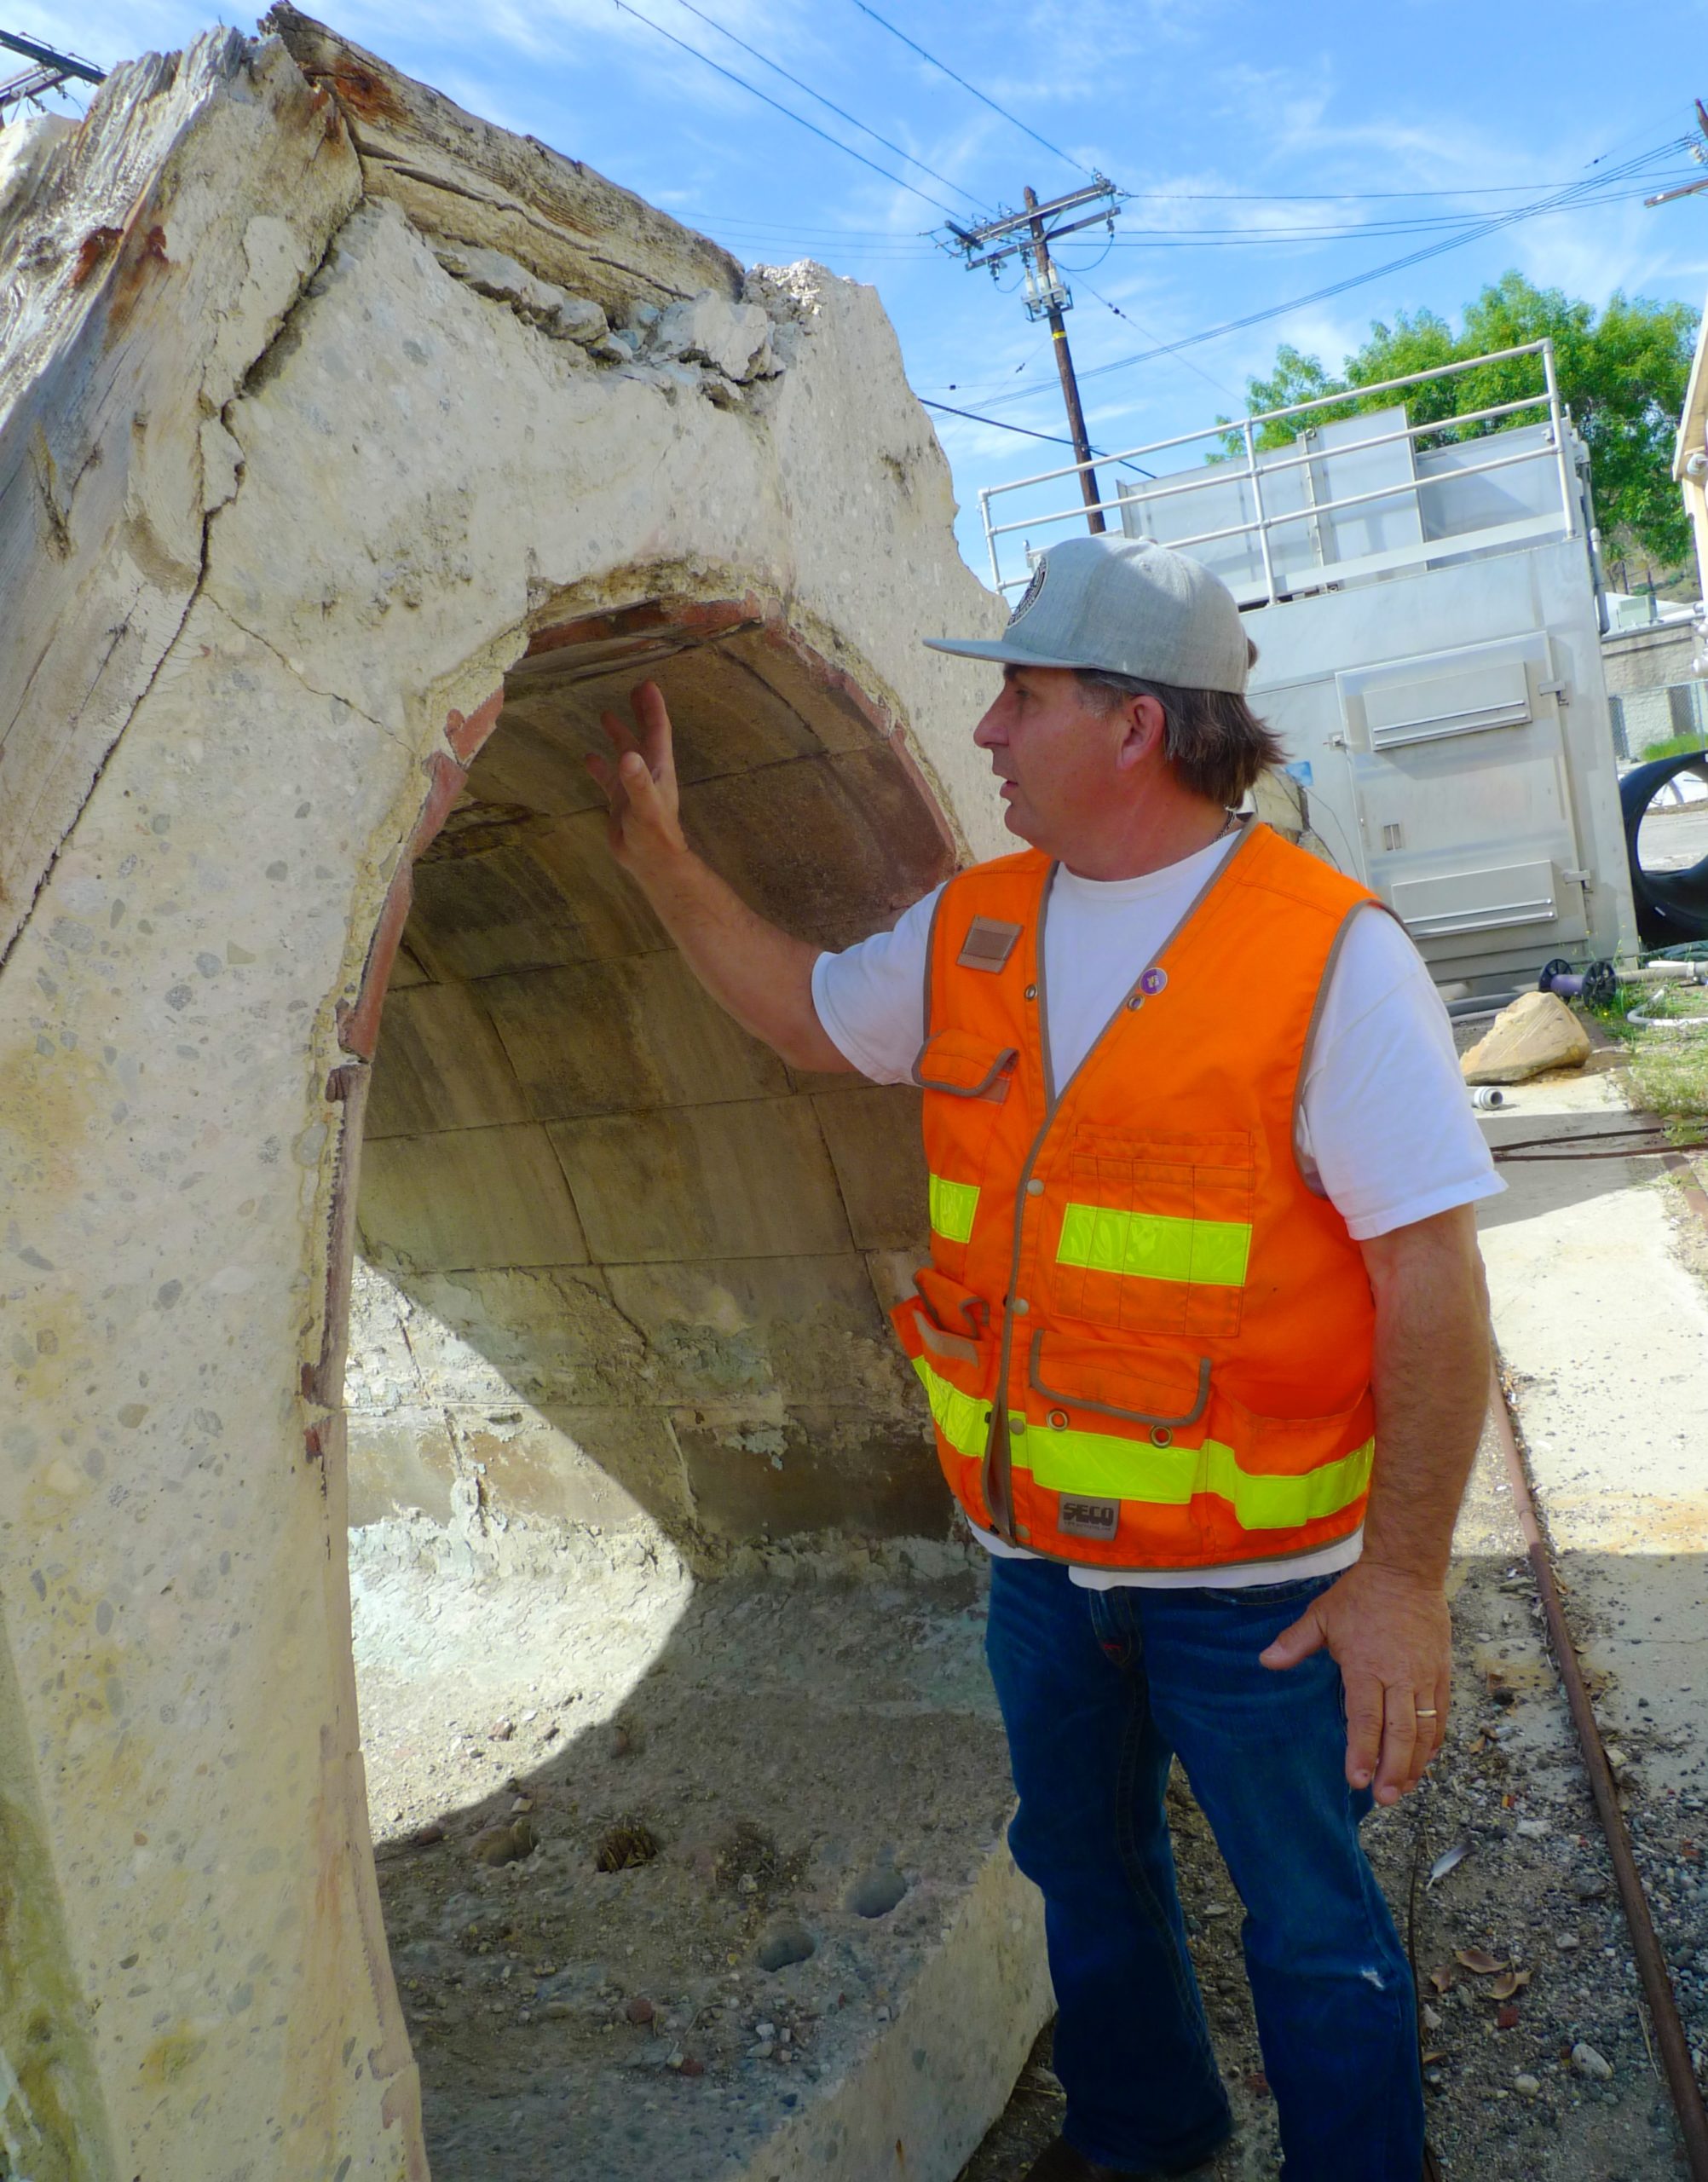 Drain Drones And Hydro-Saws: A Sewer Tour Of LA’s Underground Tech